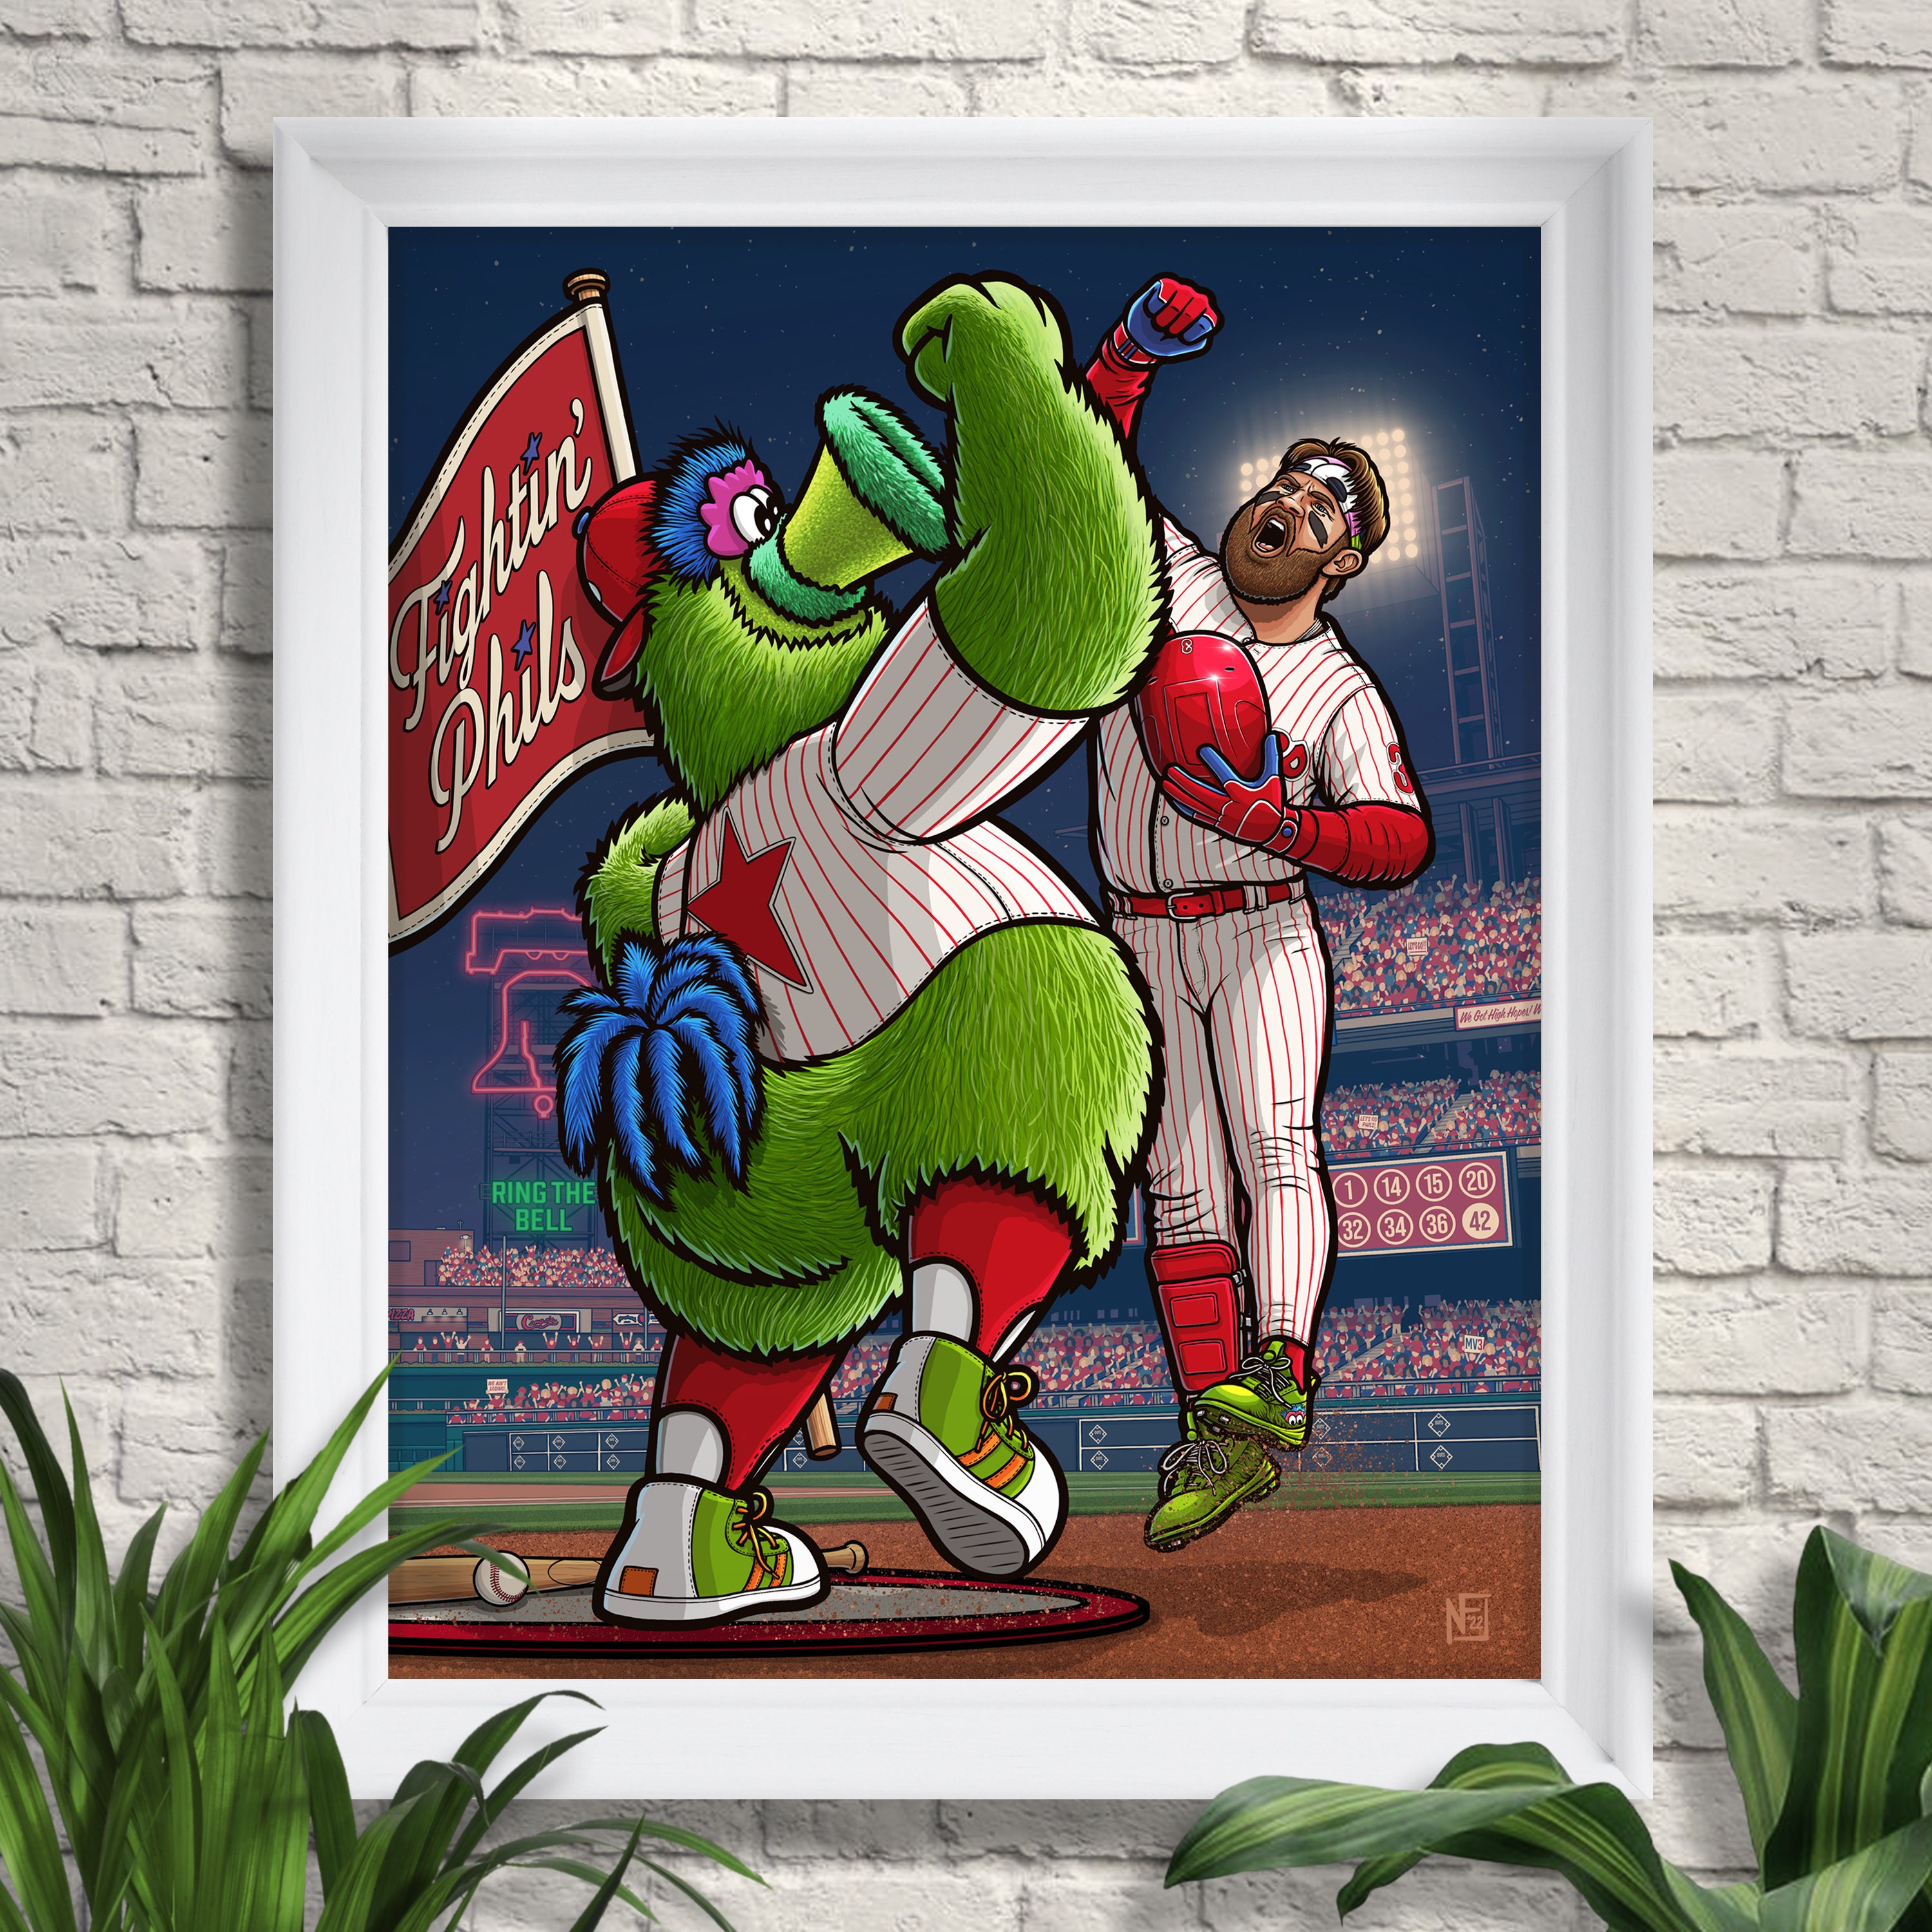 Ring the Bell Philadelphia Phillies Limited Edition Print 